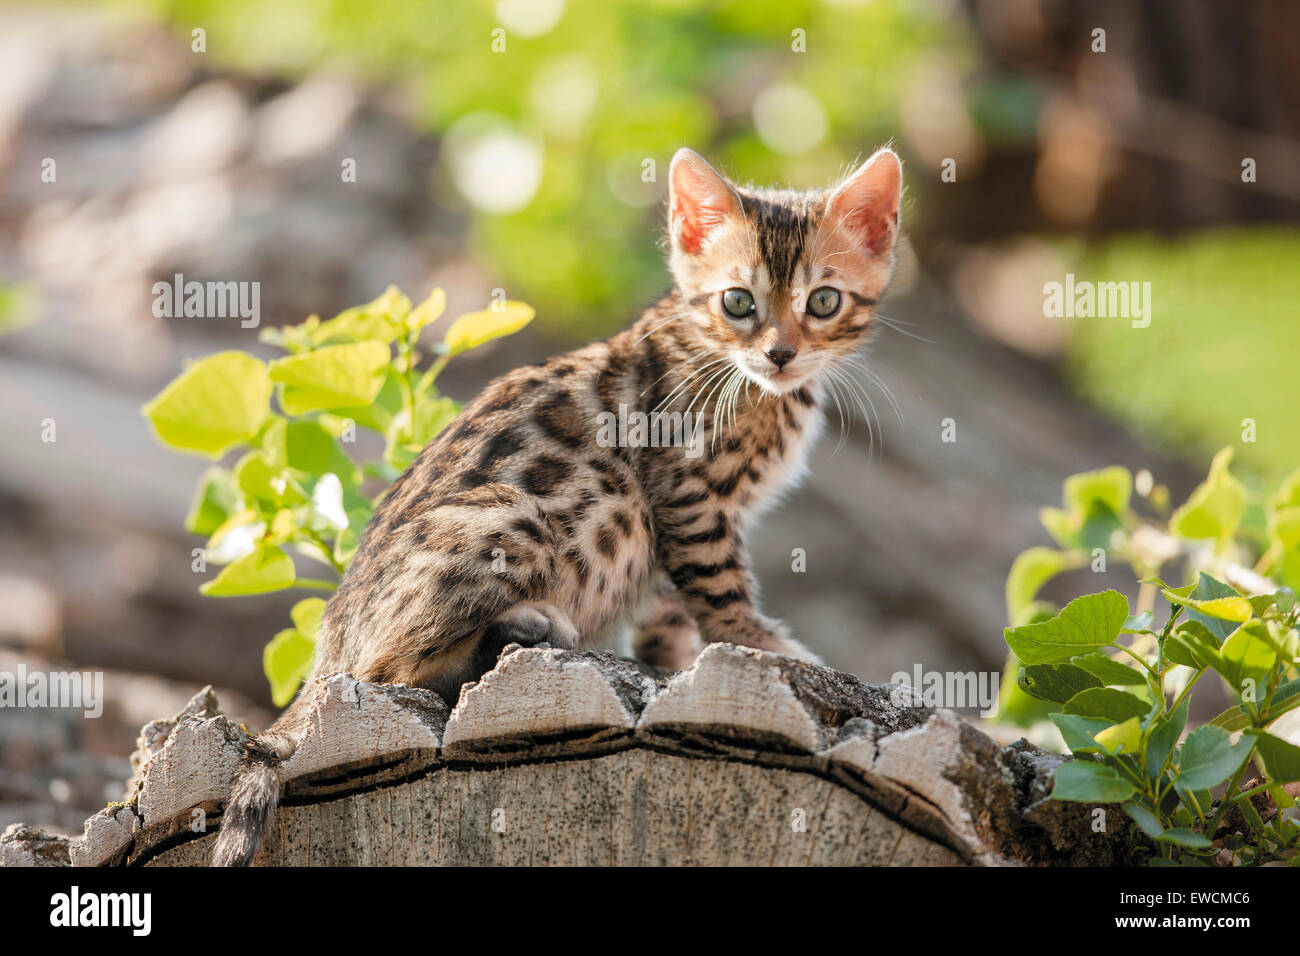 Bengal cat. Kitten sitting on a tree trunk in a garden. Germany Stock Photo